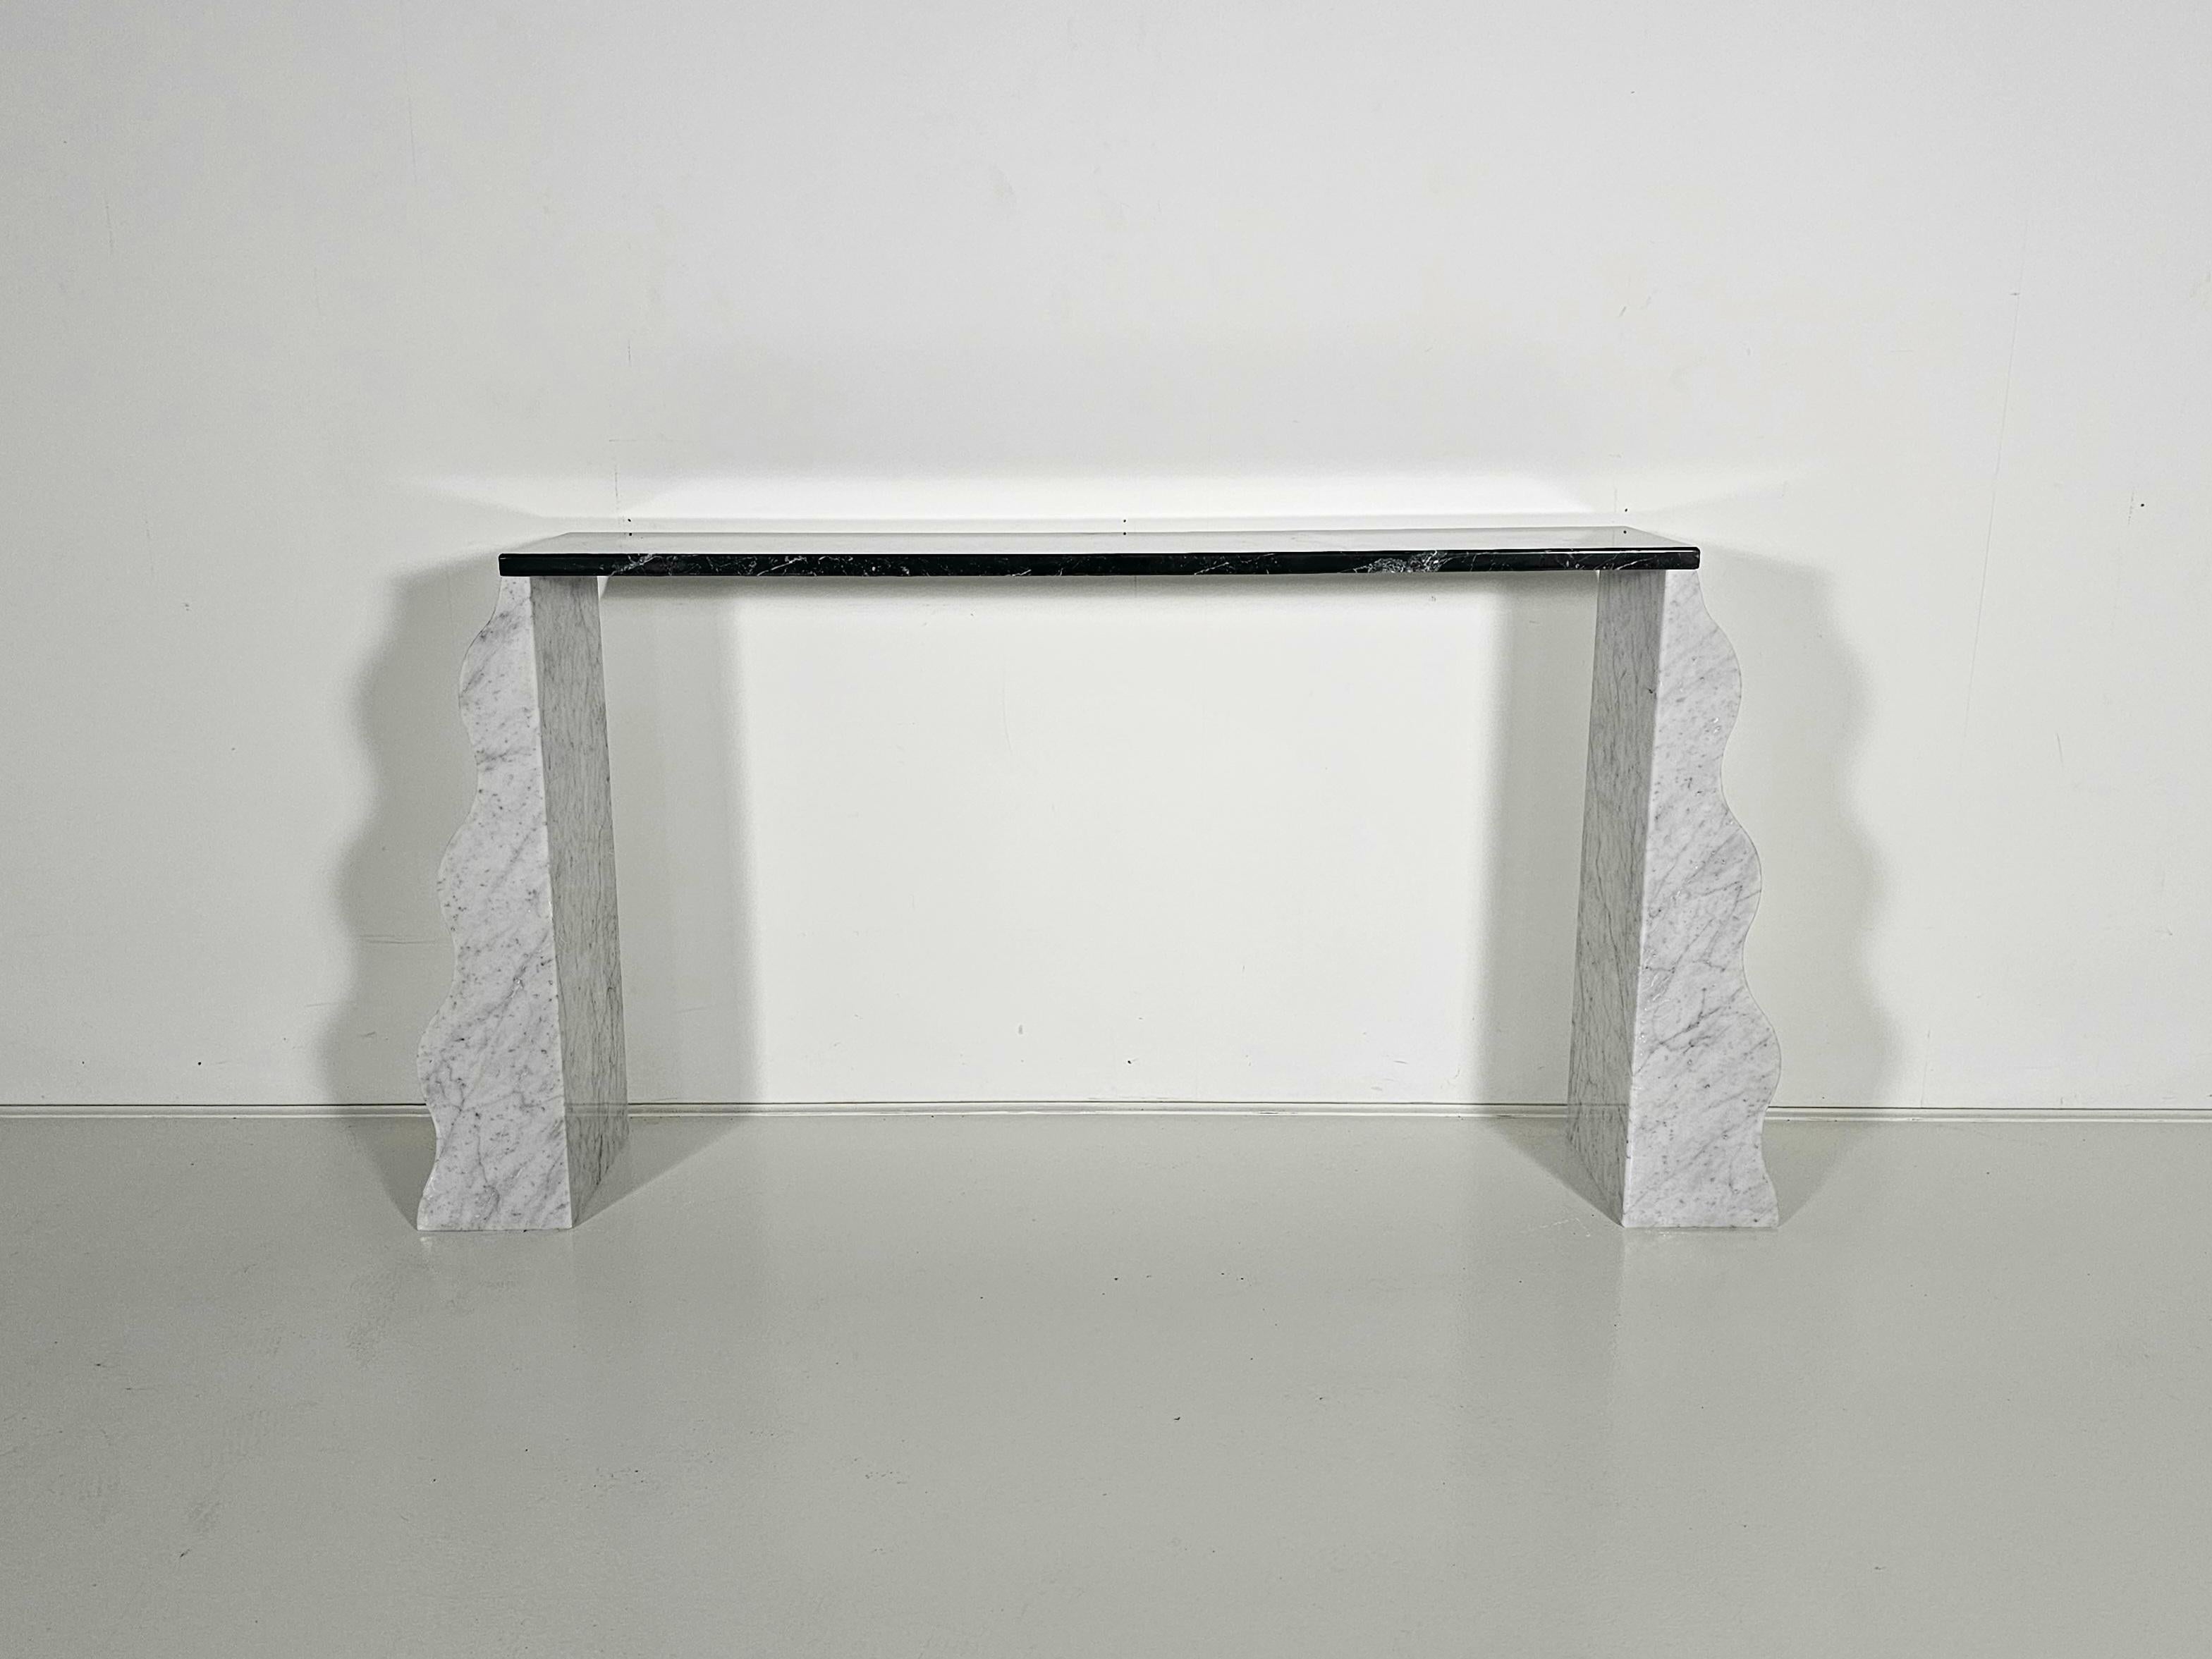 Marble console table, Montenegro model, by Ettore Sottsass, Ultima Edizione, Italy, 1980

The top is made of black marble and held by two white marble pedestals. Iconic designer Ettore Sottsass created the Montenegro console table in 1980 and shows